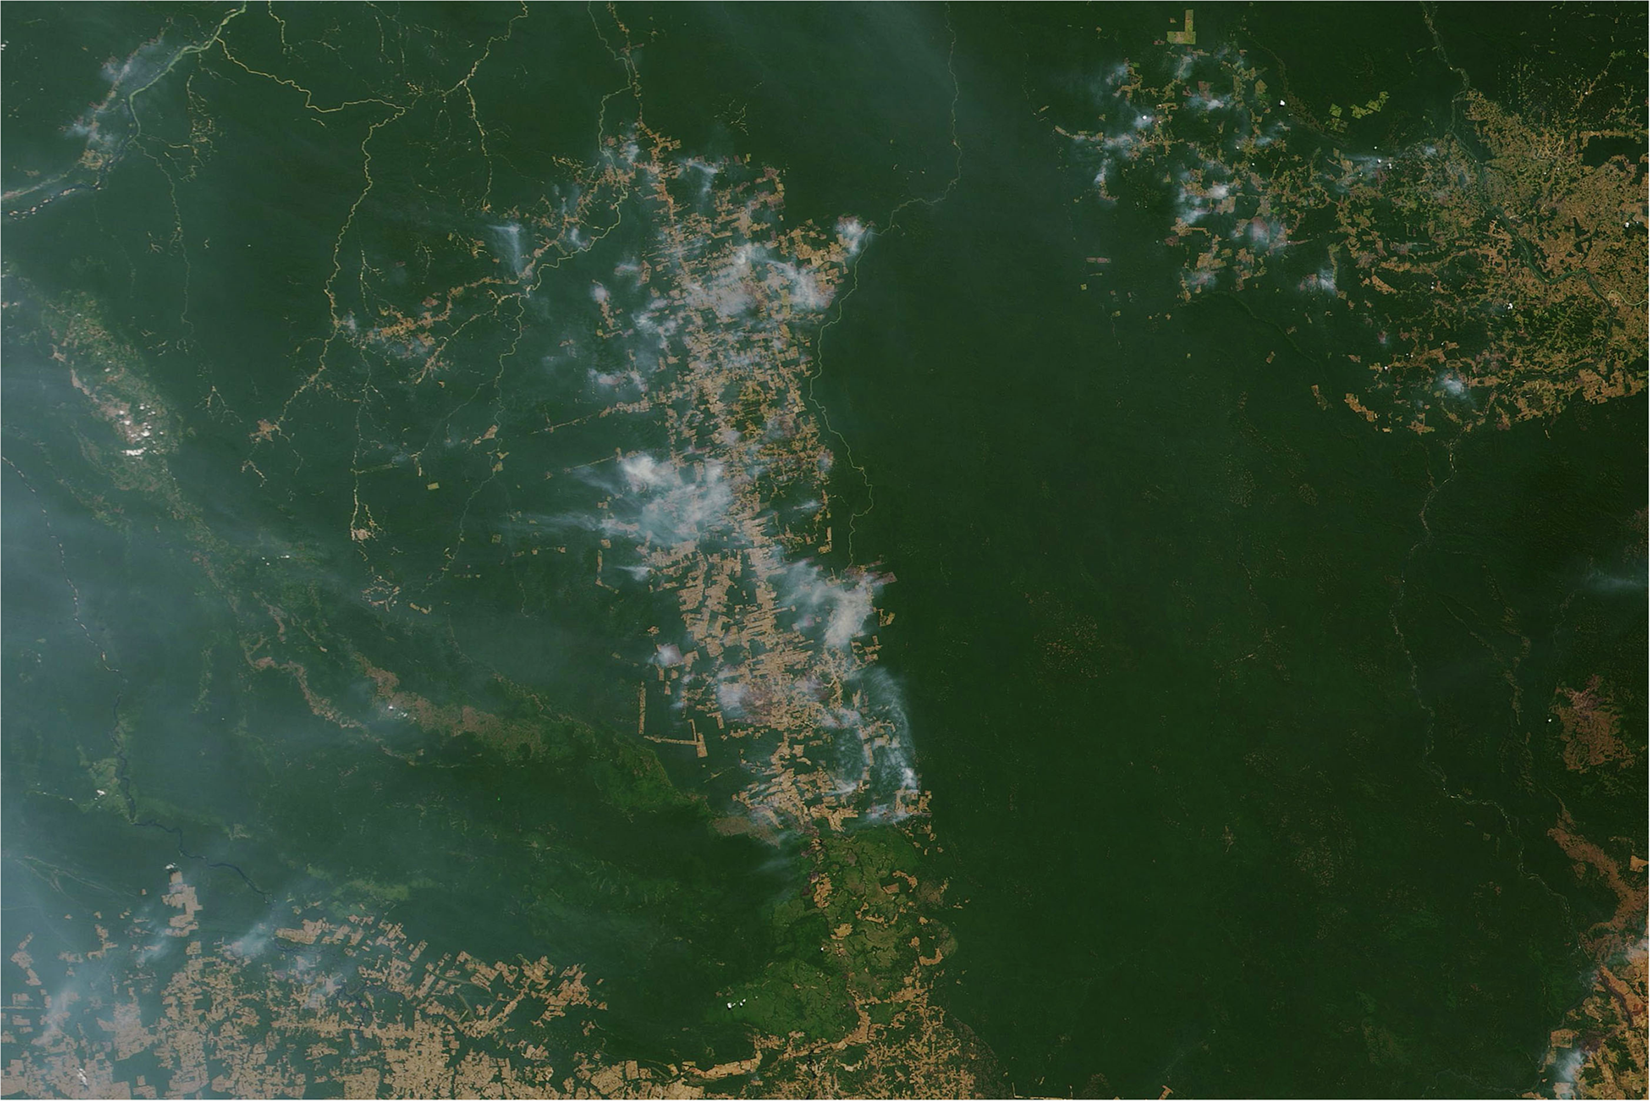 Introducing a global planetary ecosystem accounting in the wake of the  Amazon Forest fires | Humanities and Social Sciences Communications